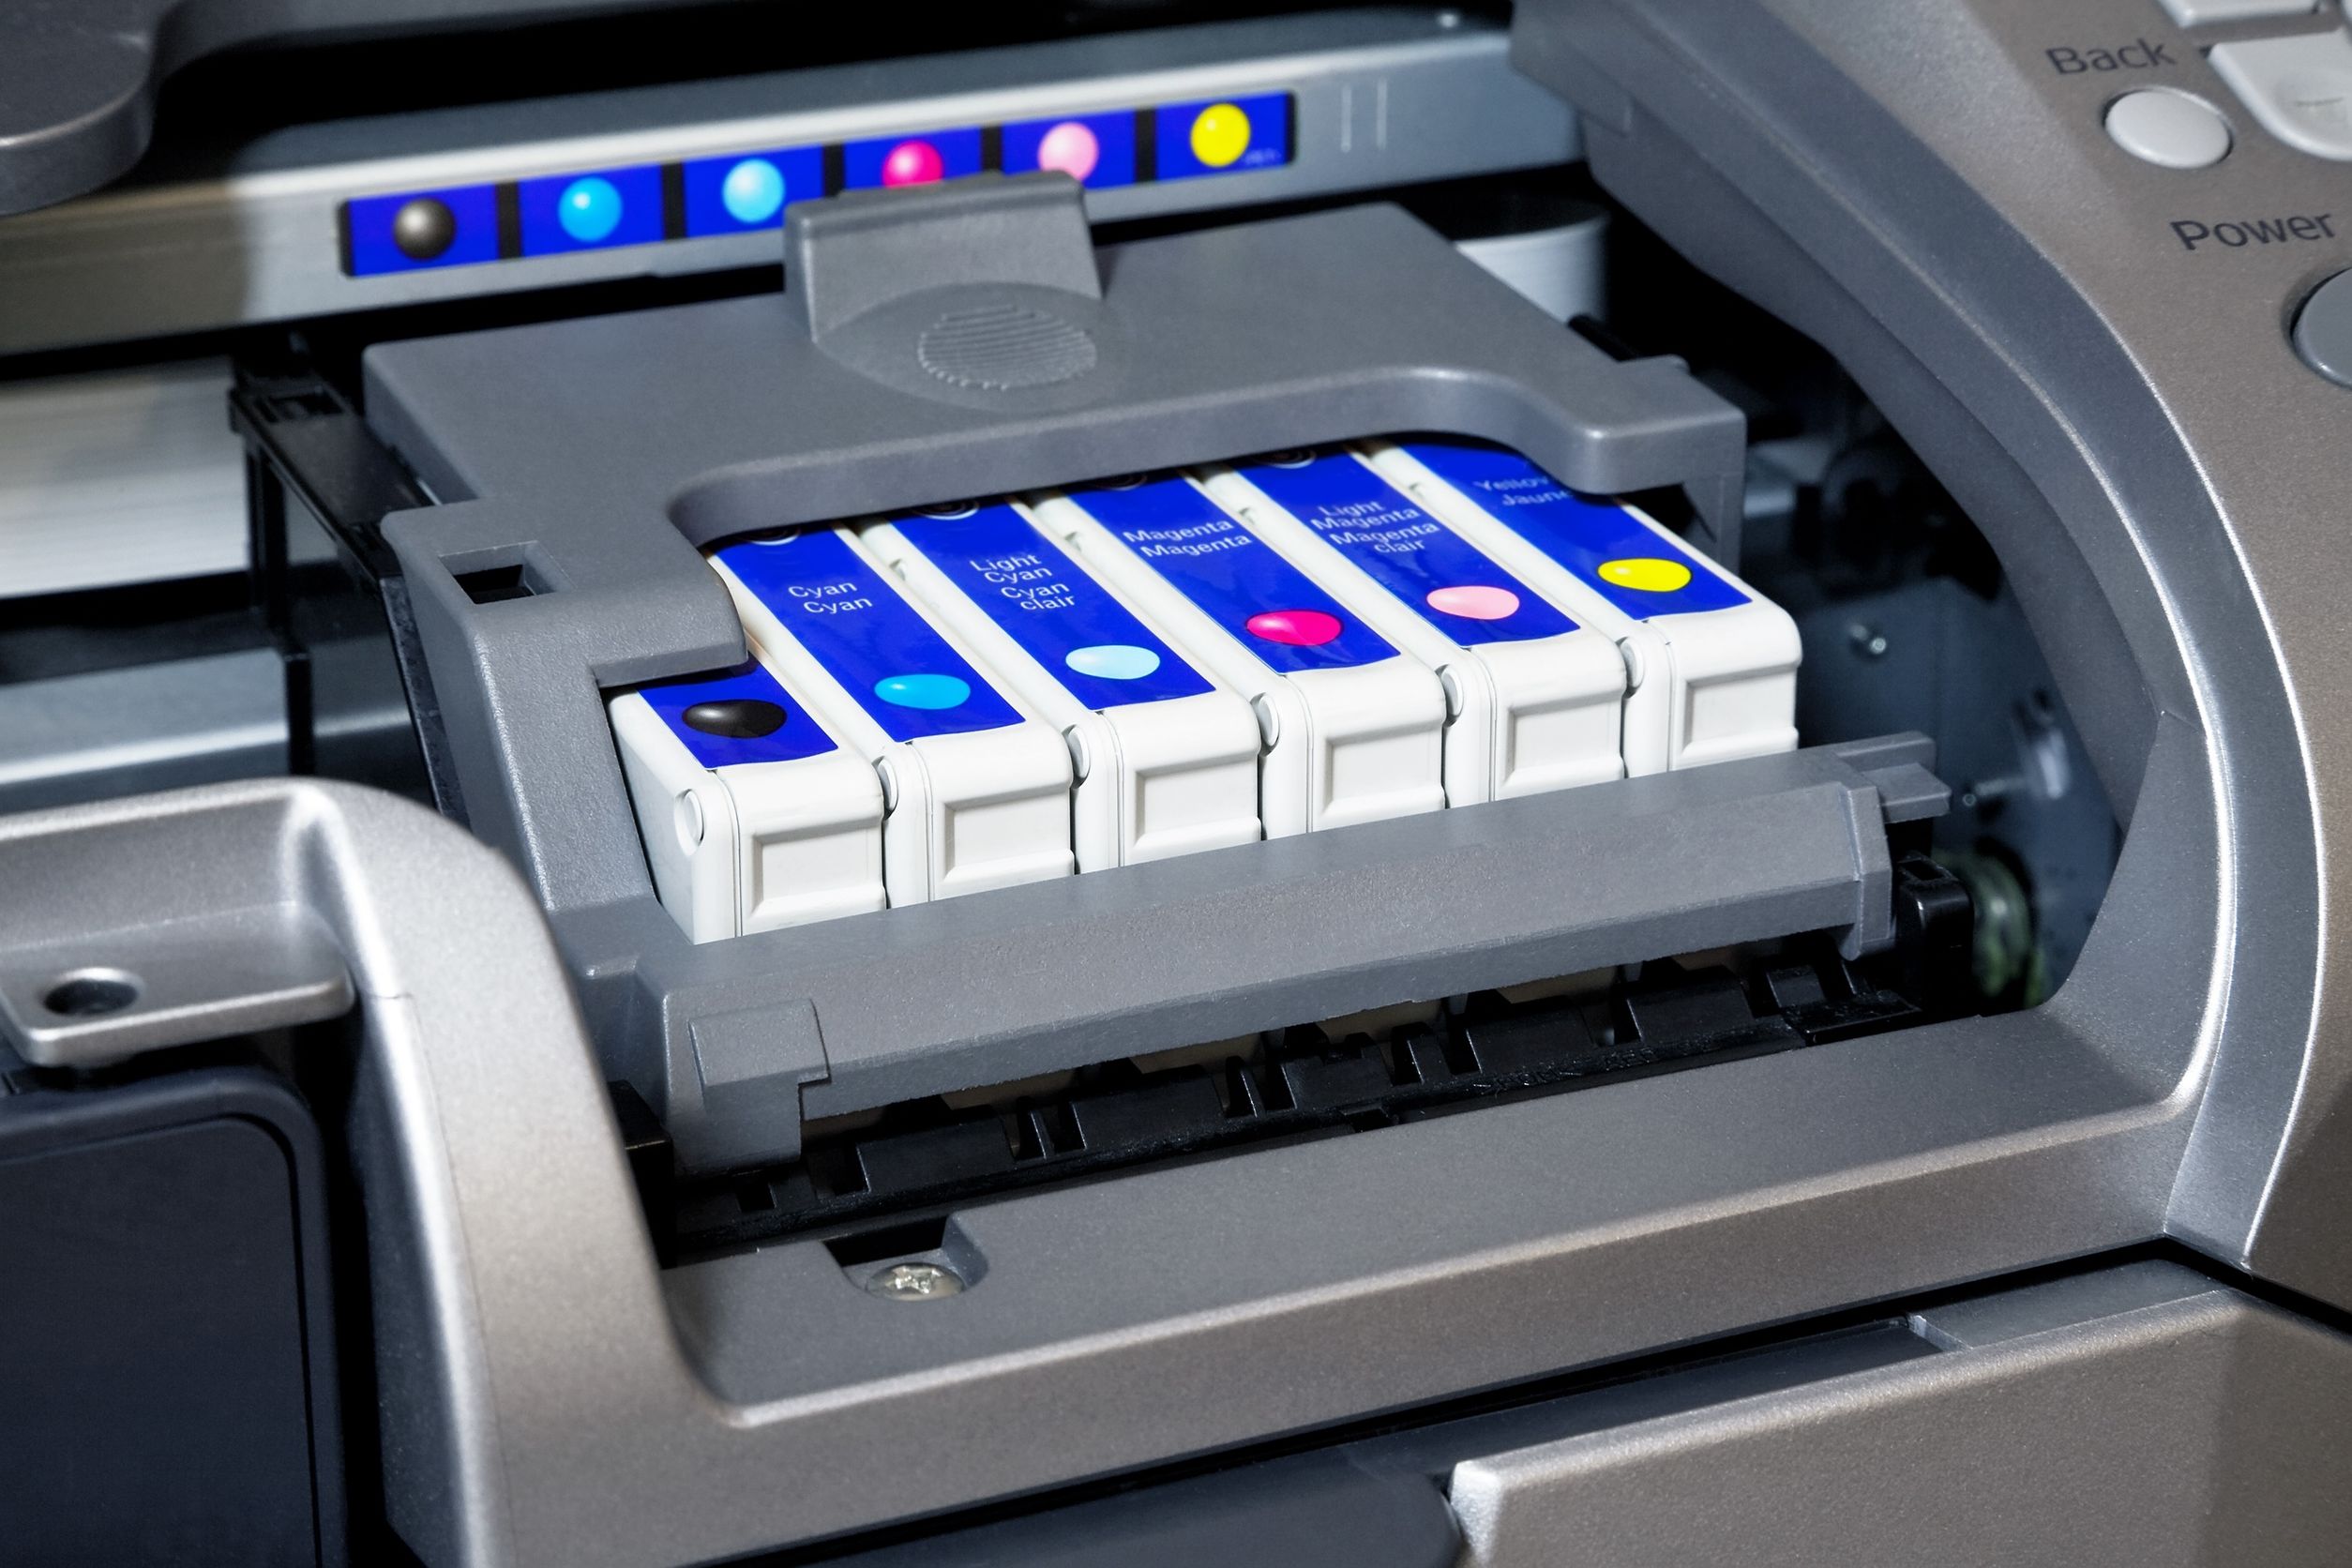 Acquire Quality Transfer Printing Technology As a Business Solution